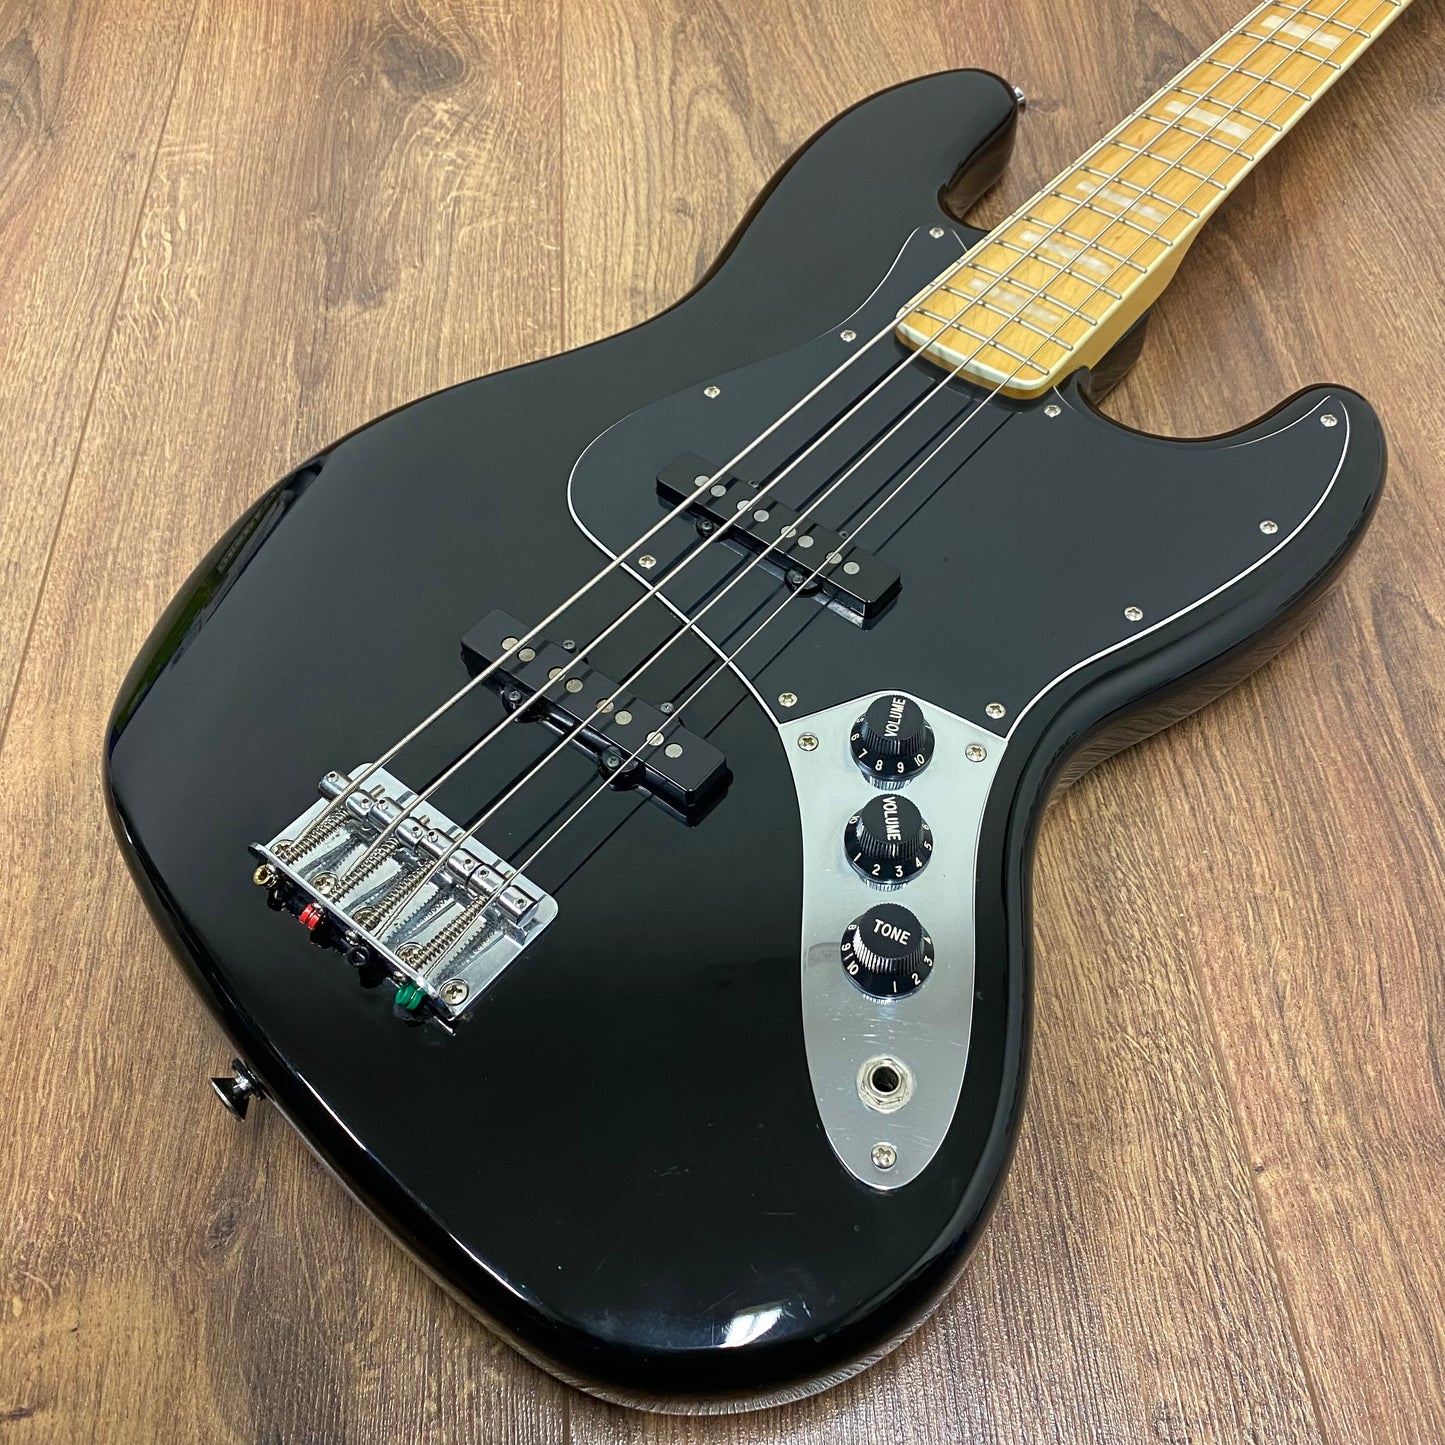 Pre-Owned Squier Vintage Modified '77 Jazz Bass - Black - 2015